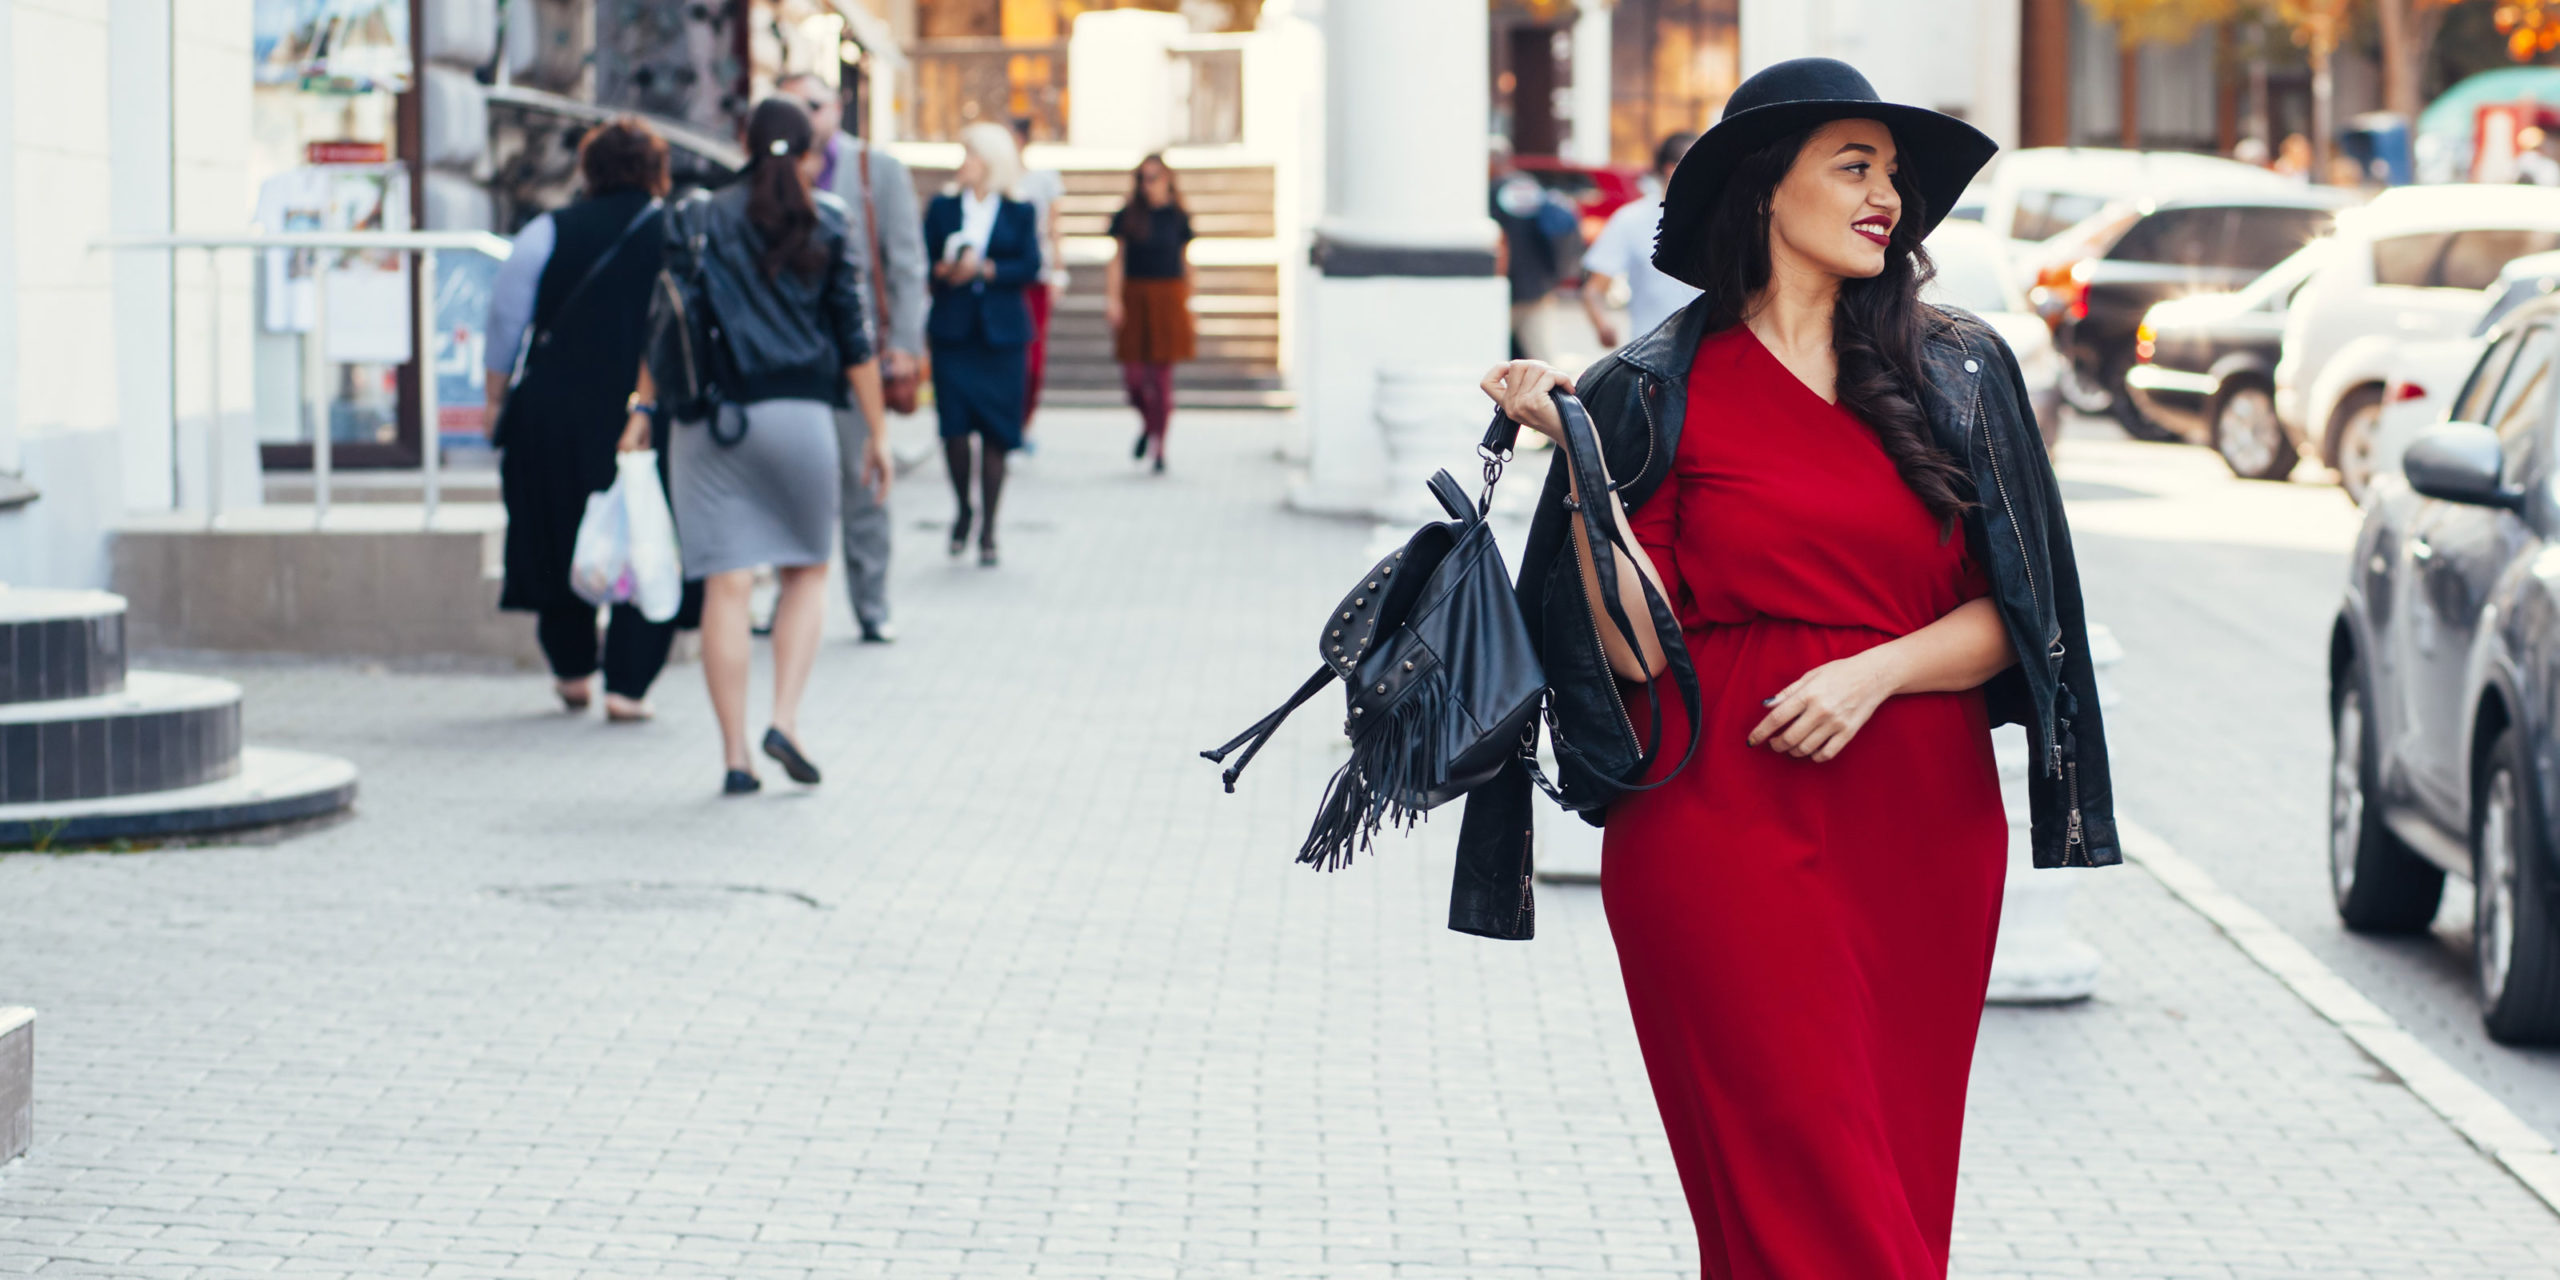 Woman in a red dress smiling on the street